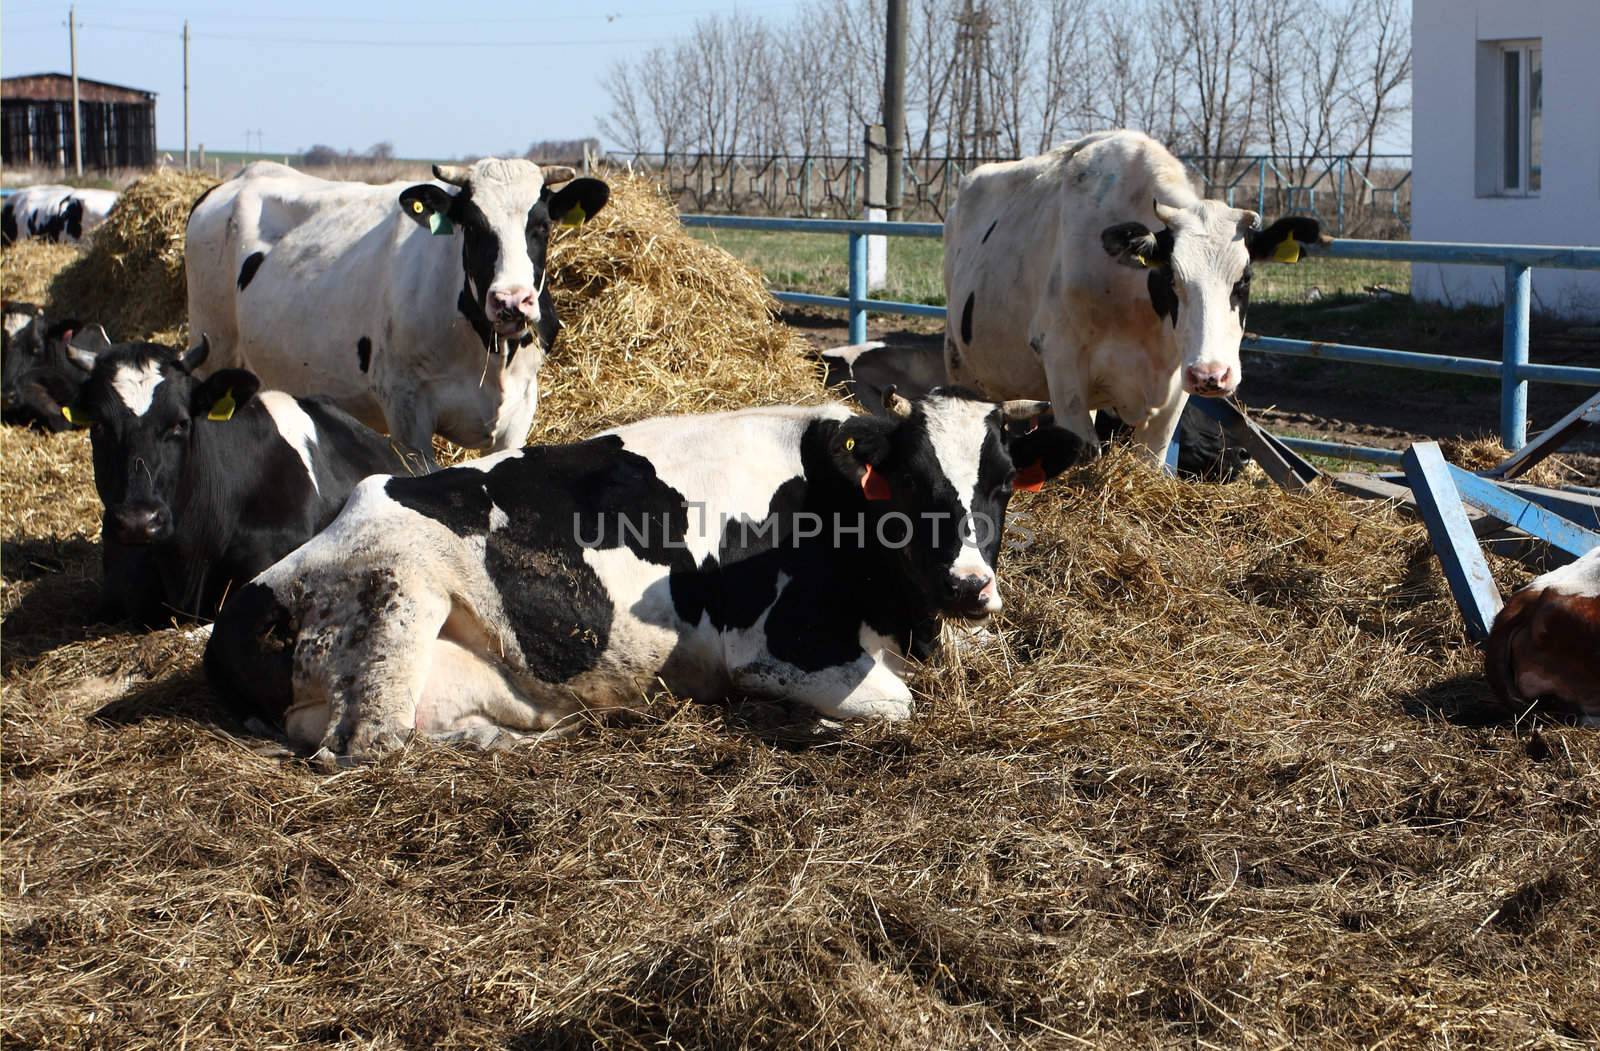 cow, animal, house, mammal, milk, hay, farm, agricultural, industries, udder, meadow, pasture, cows, large, horned, cattle, beef, herd